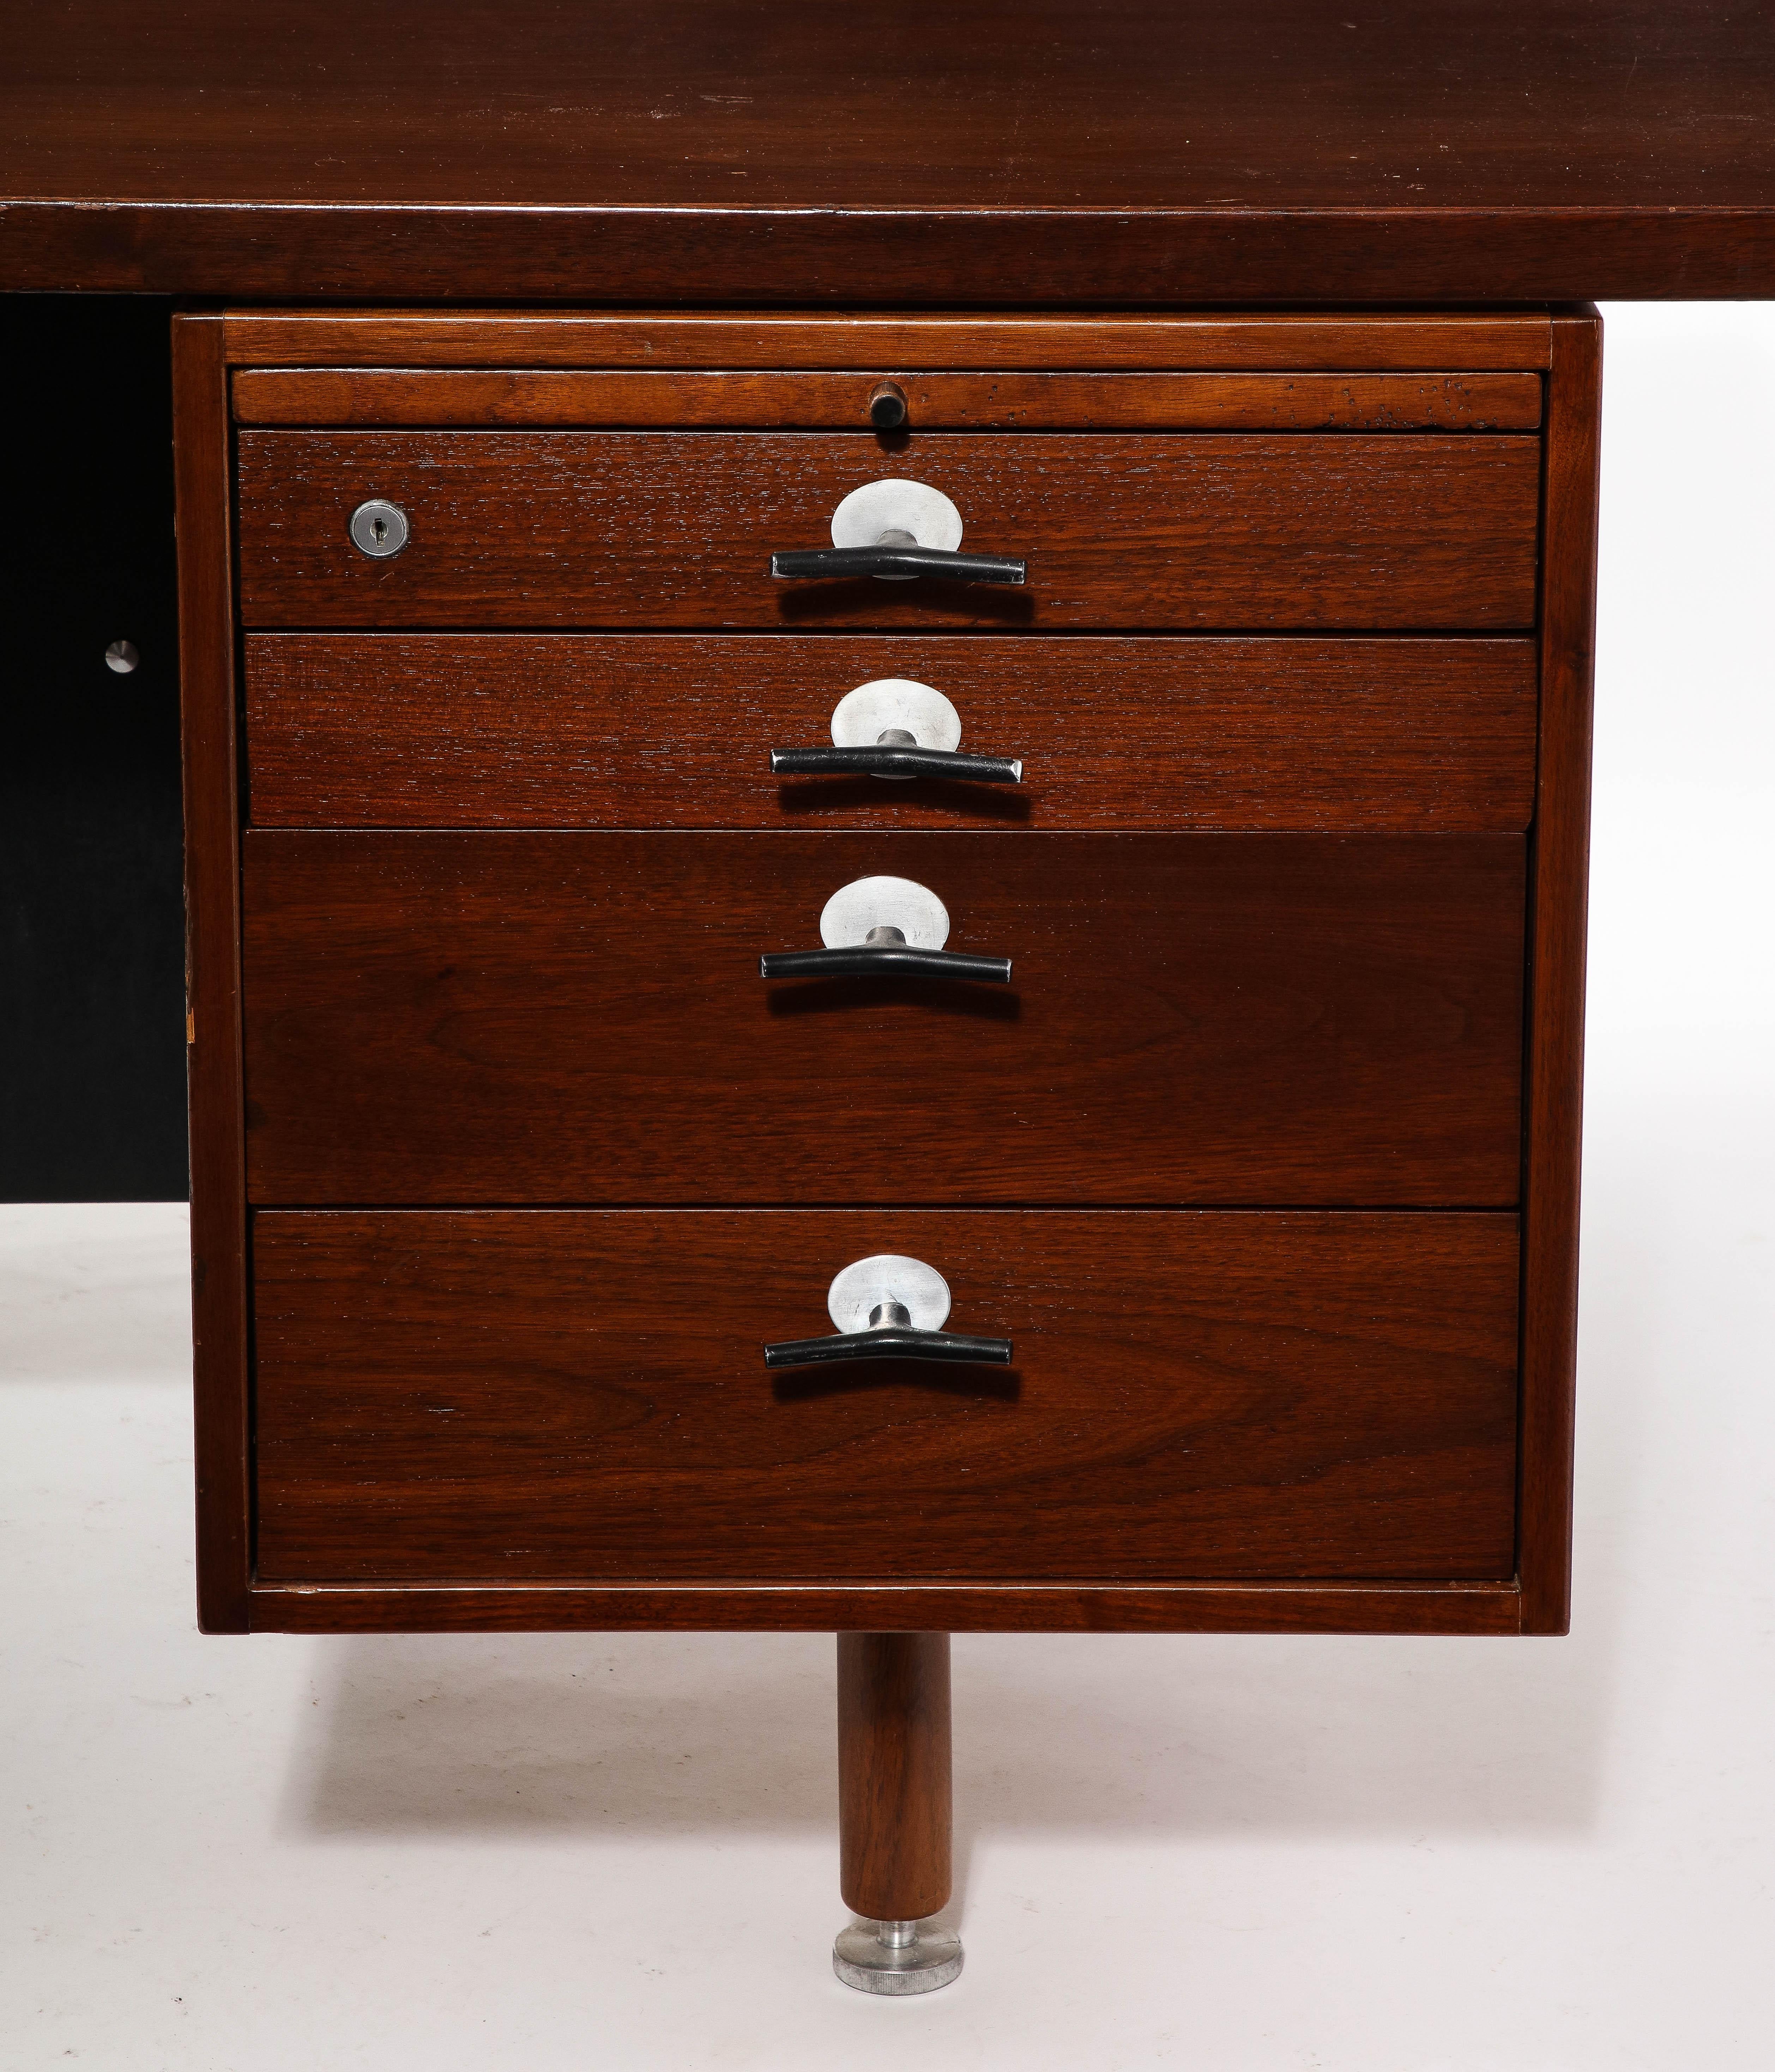 A large and handsome executive desk constructed of solid walnut with 